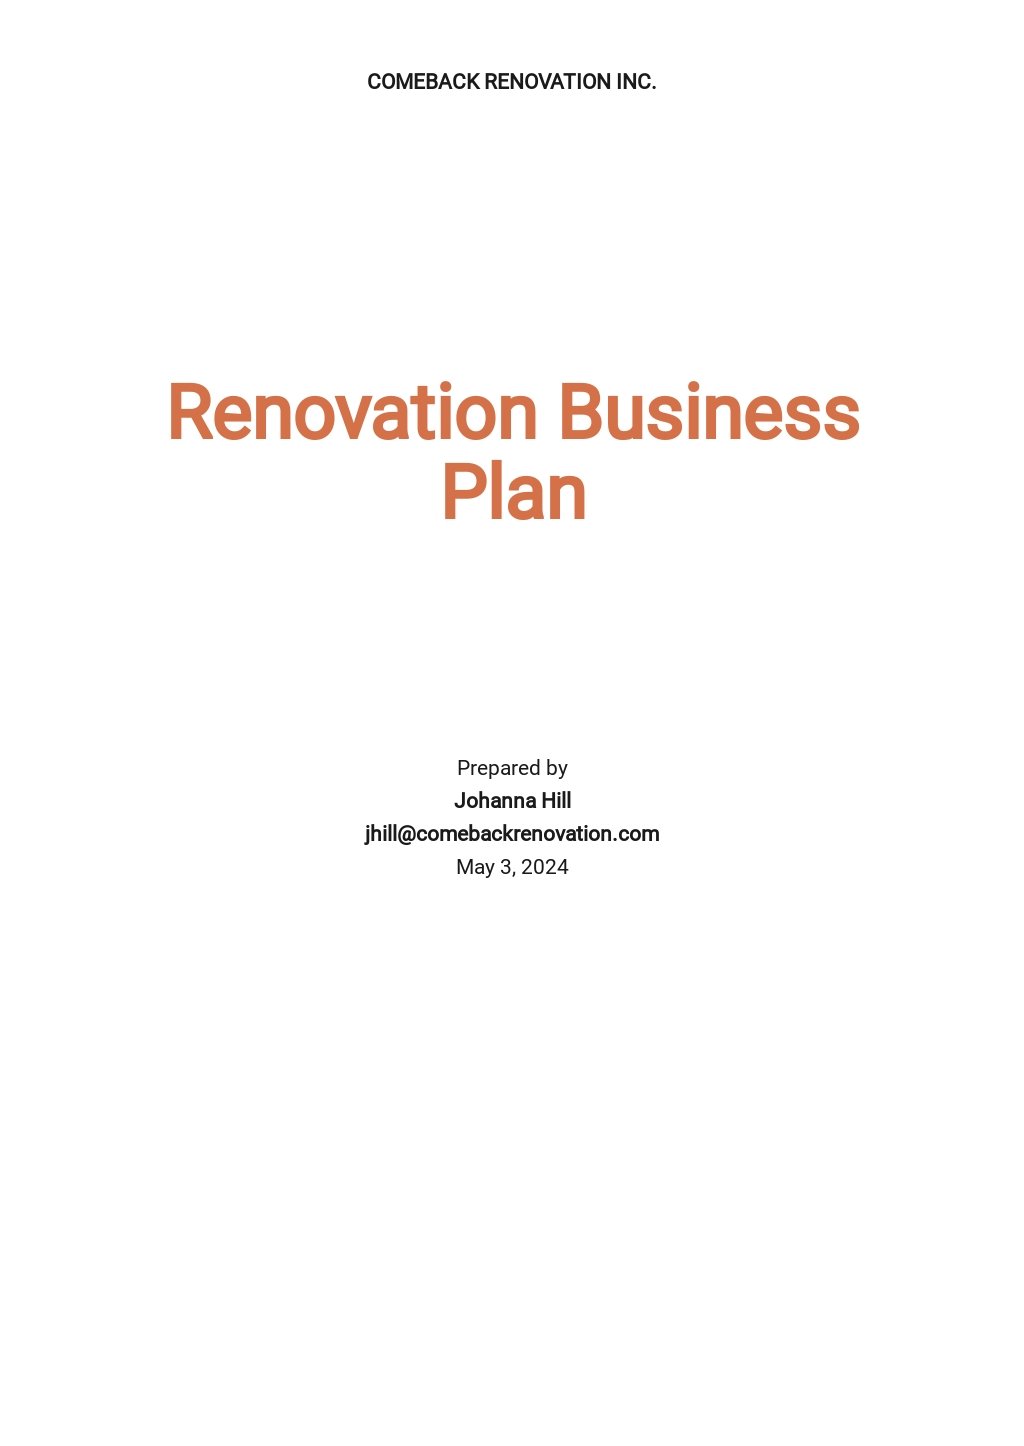 business plan template for remodeling company